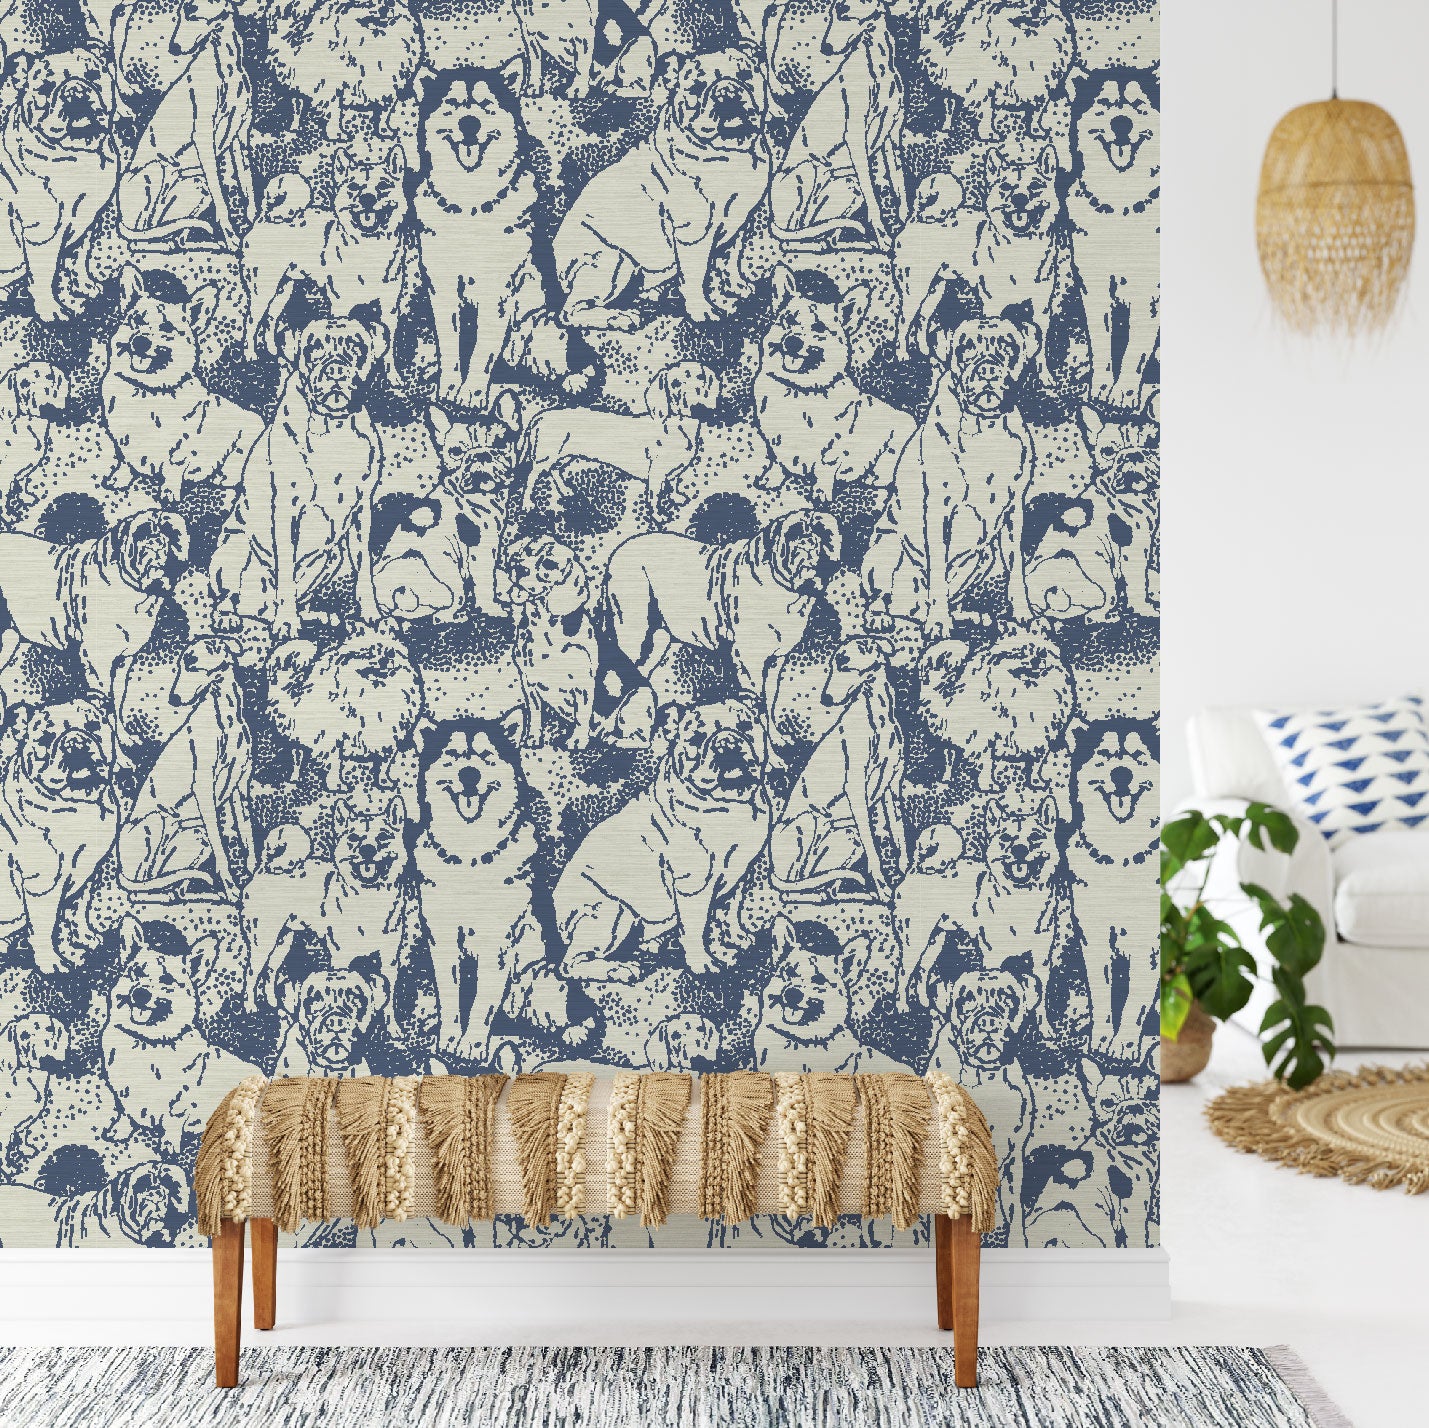 Foyer entrance with allover dog printed grasscloth wallpaper featuring a variety of dogs: huskie, bulldogs, mastiff, wiener dogs, beagles, yorkie and more on an off white base with dusty slate print